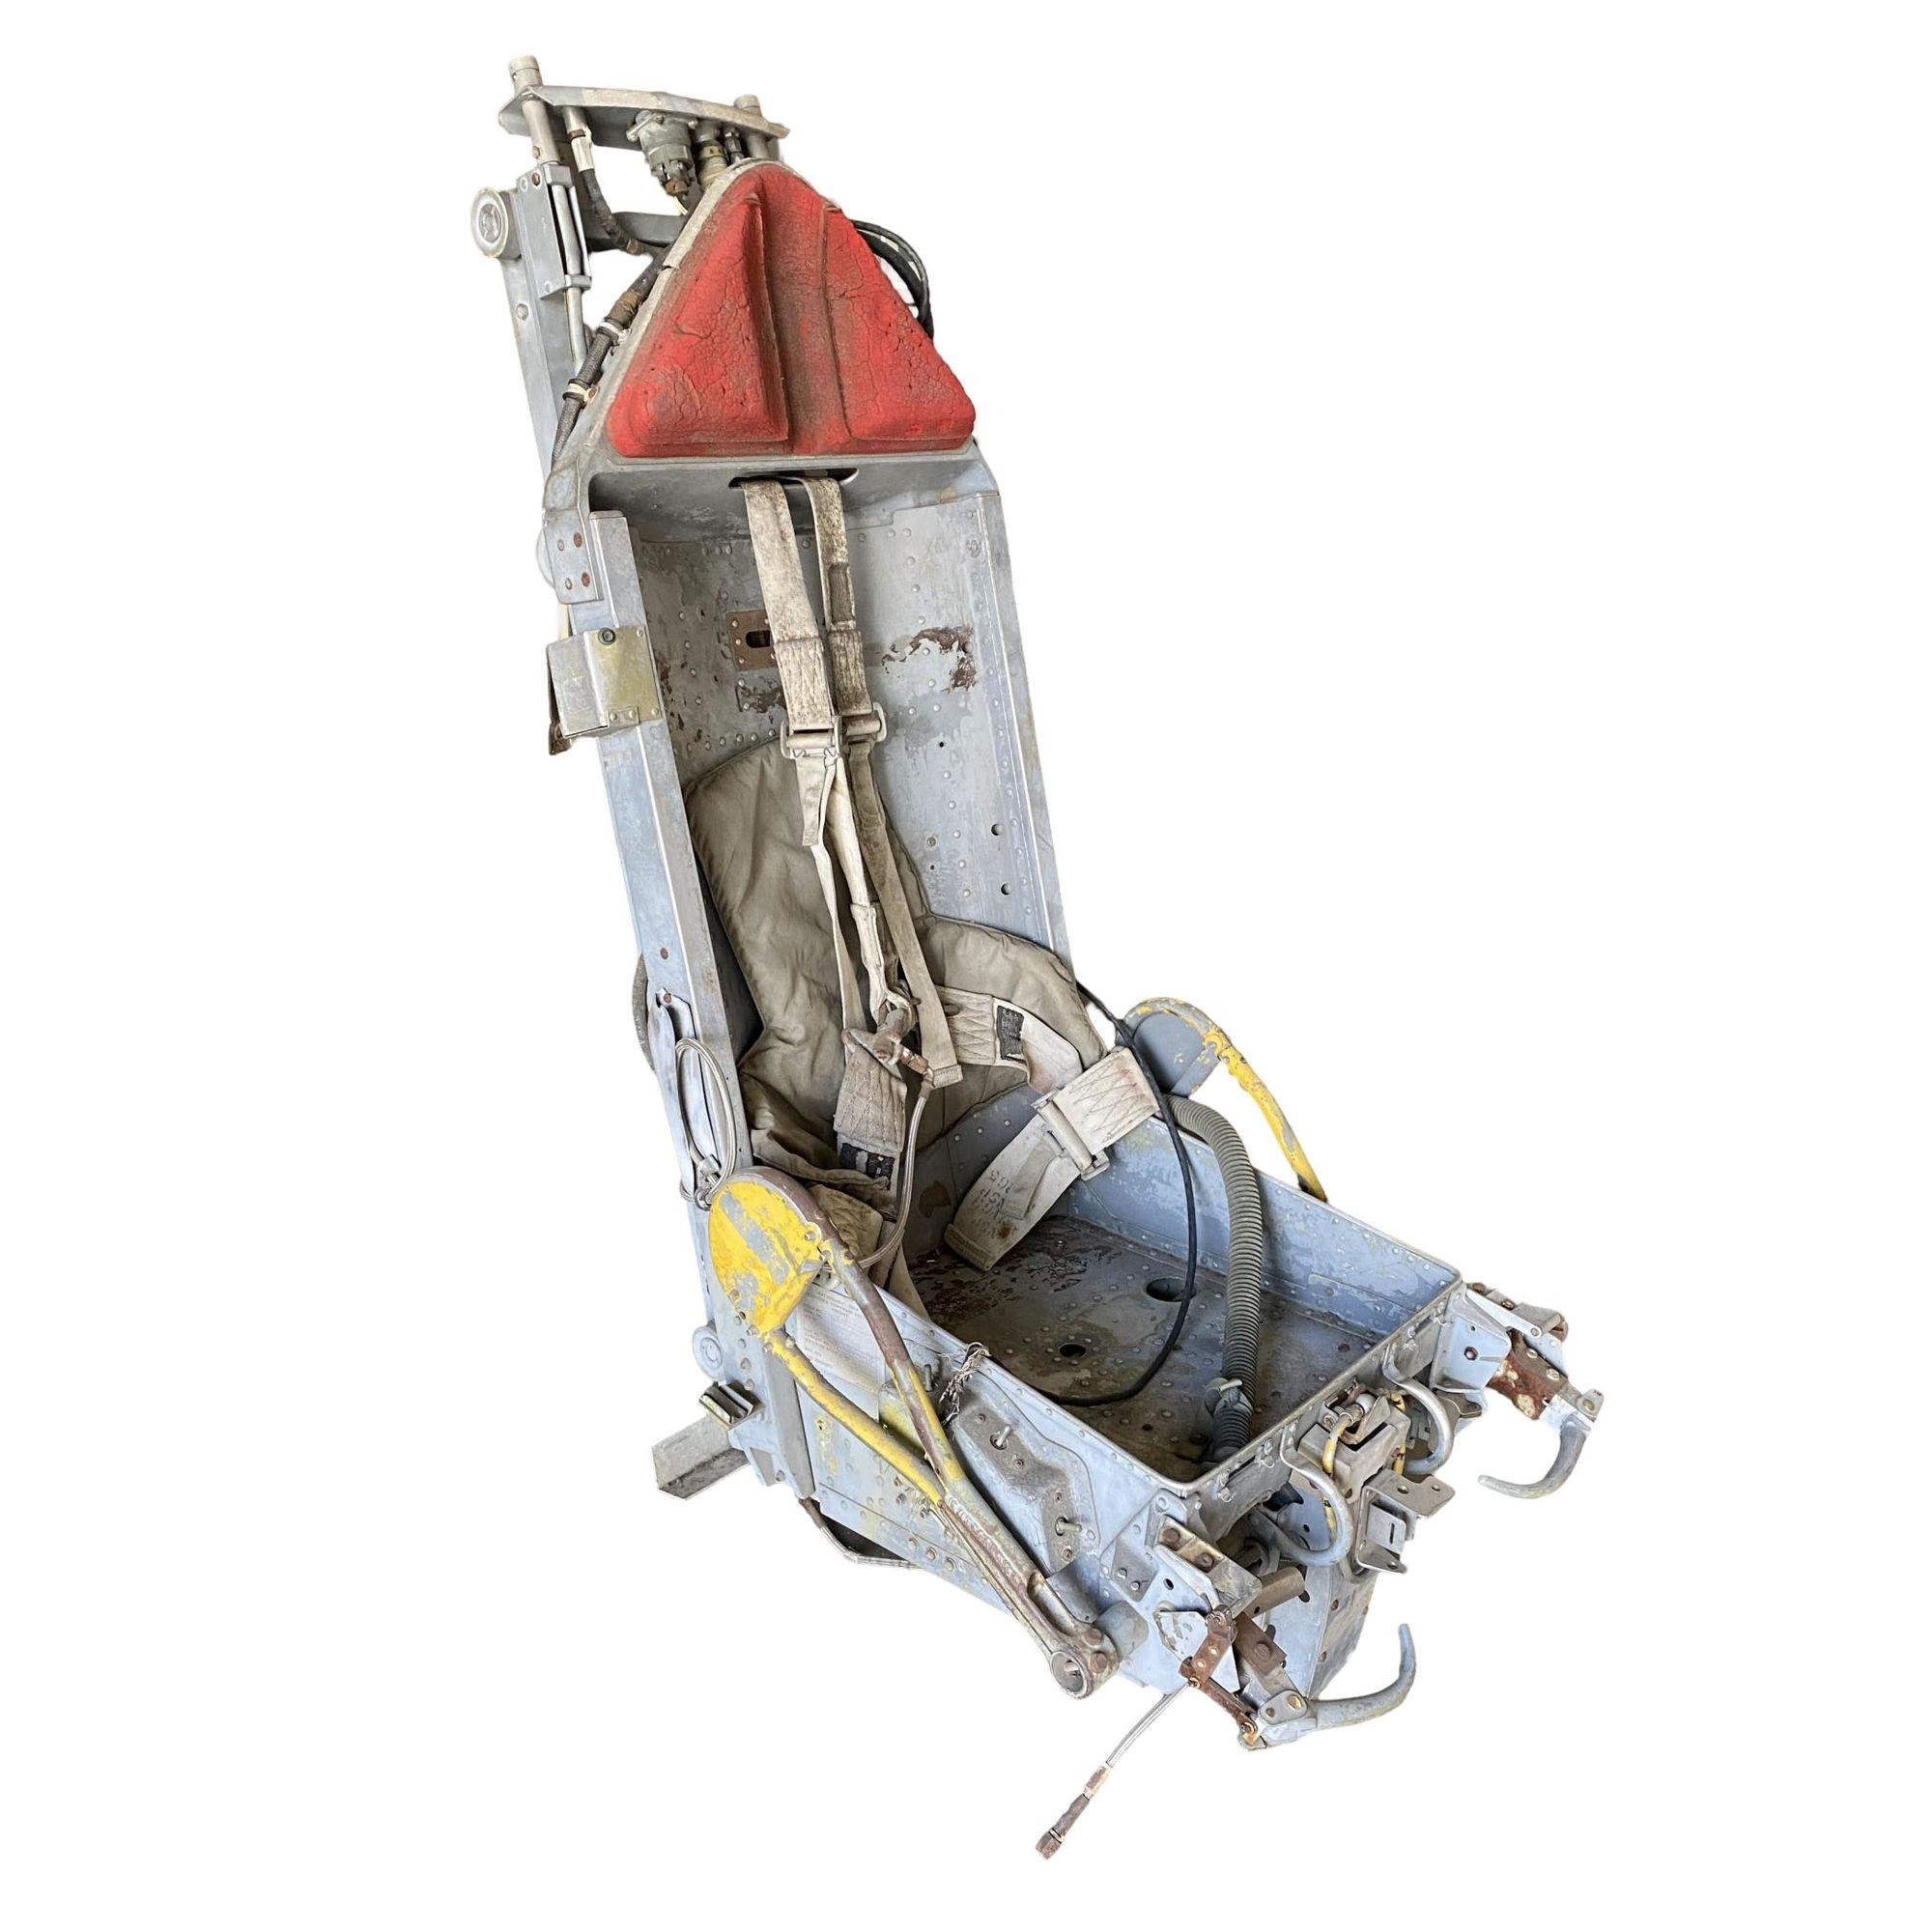 This is an ejection seat from a Boeing B-52 that is set up for training. The tag on the seat indicates that it was the Bombardier's seat which is a downward ejecting seat located on the lower deck. 

This is not a working ejection seat and it